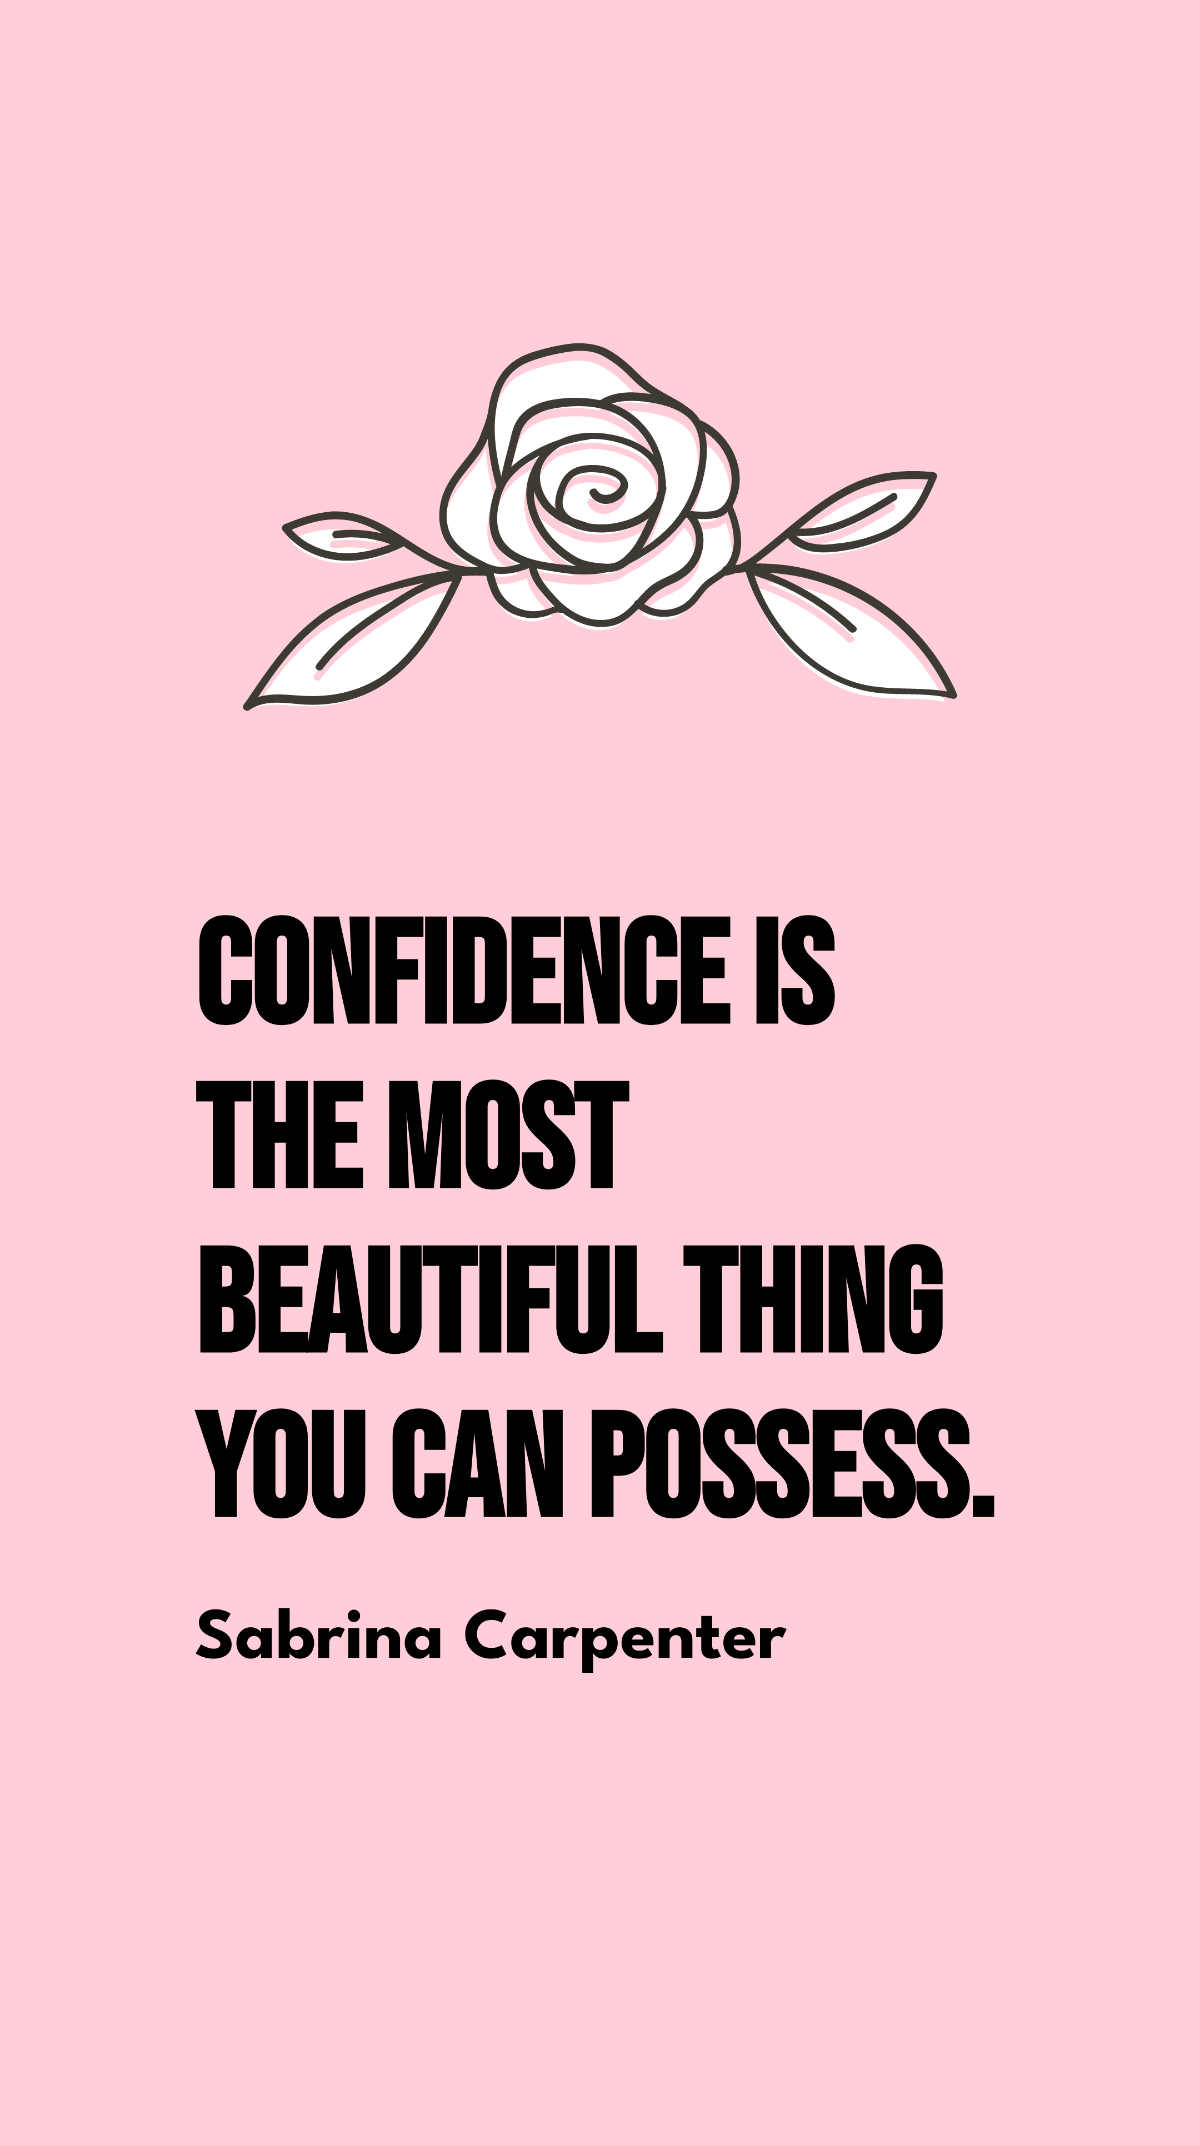 Sabrina Carpenter - Confidence is the most beautiful thing you can possess.